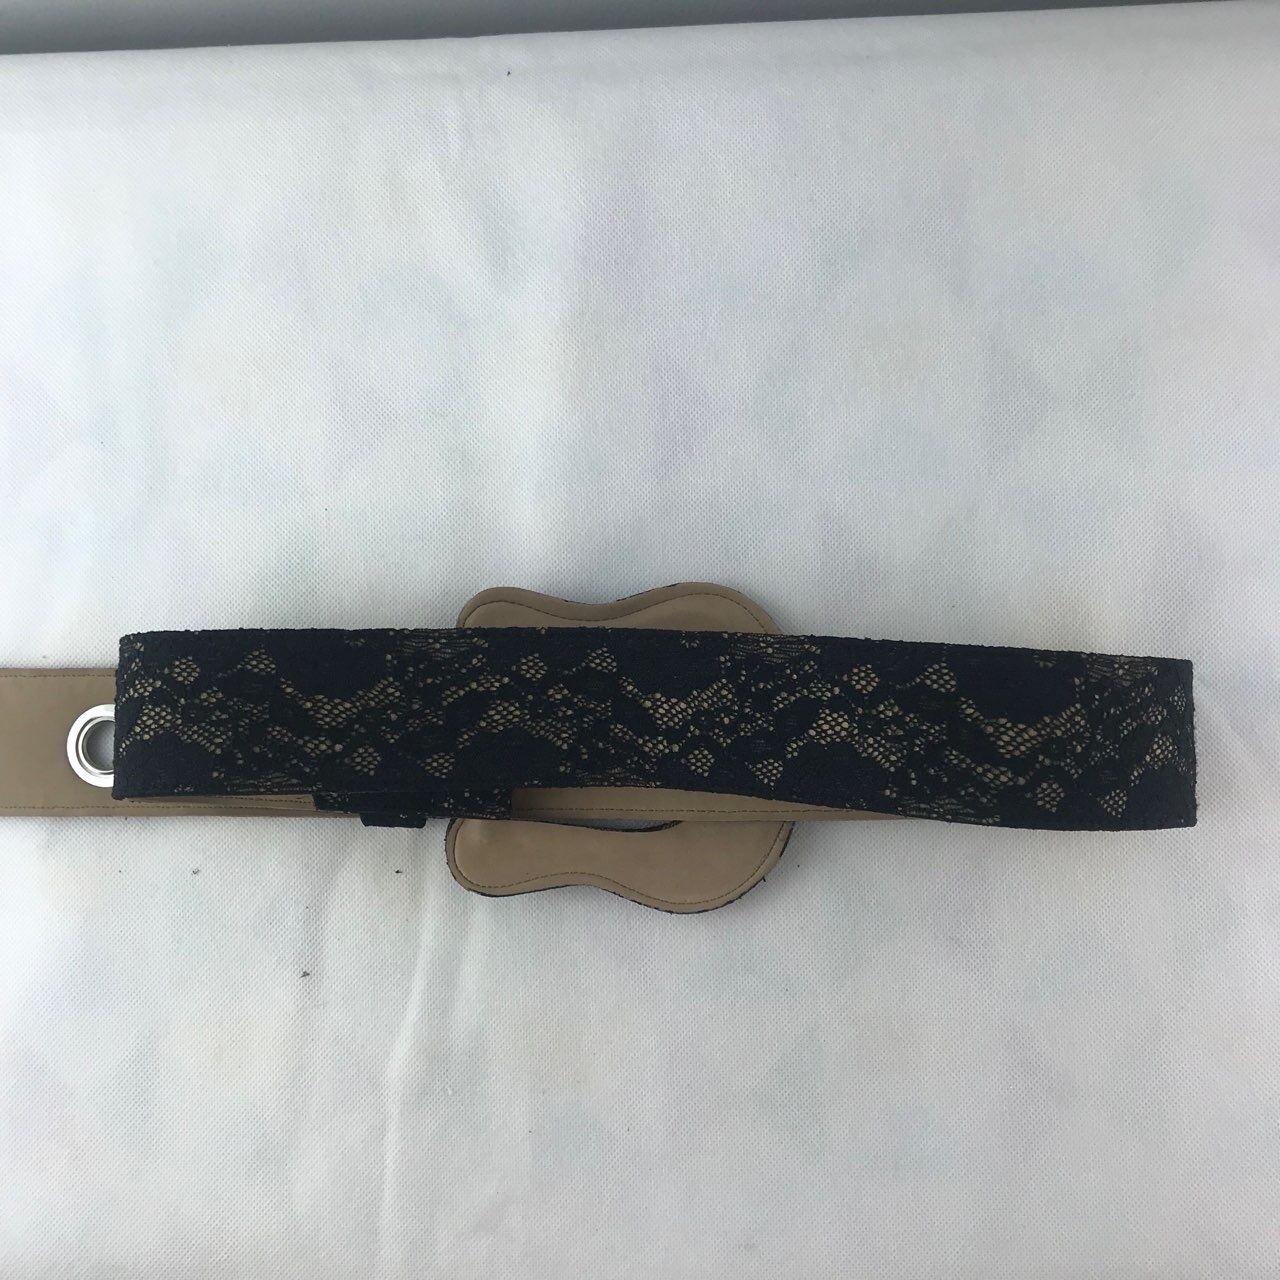 Guess Lace Belt with Large Buckle